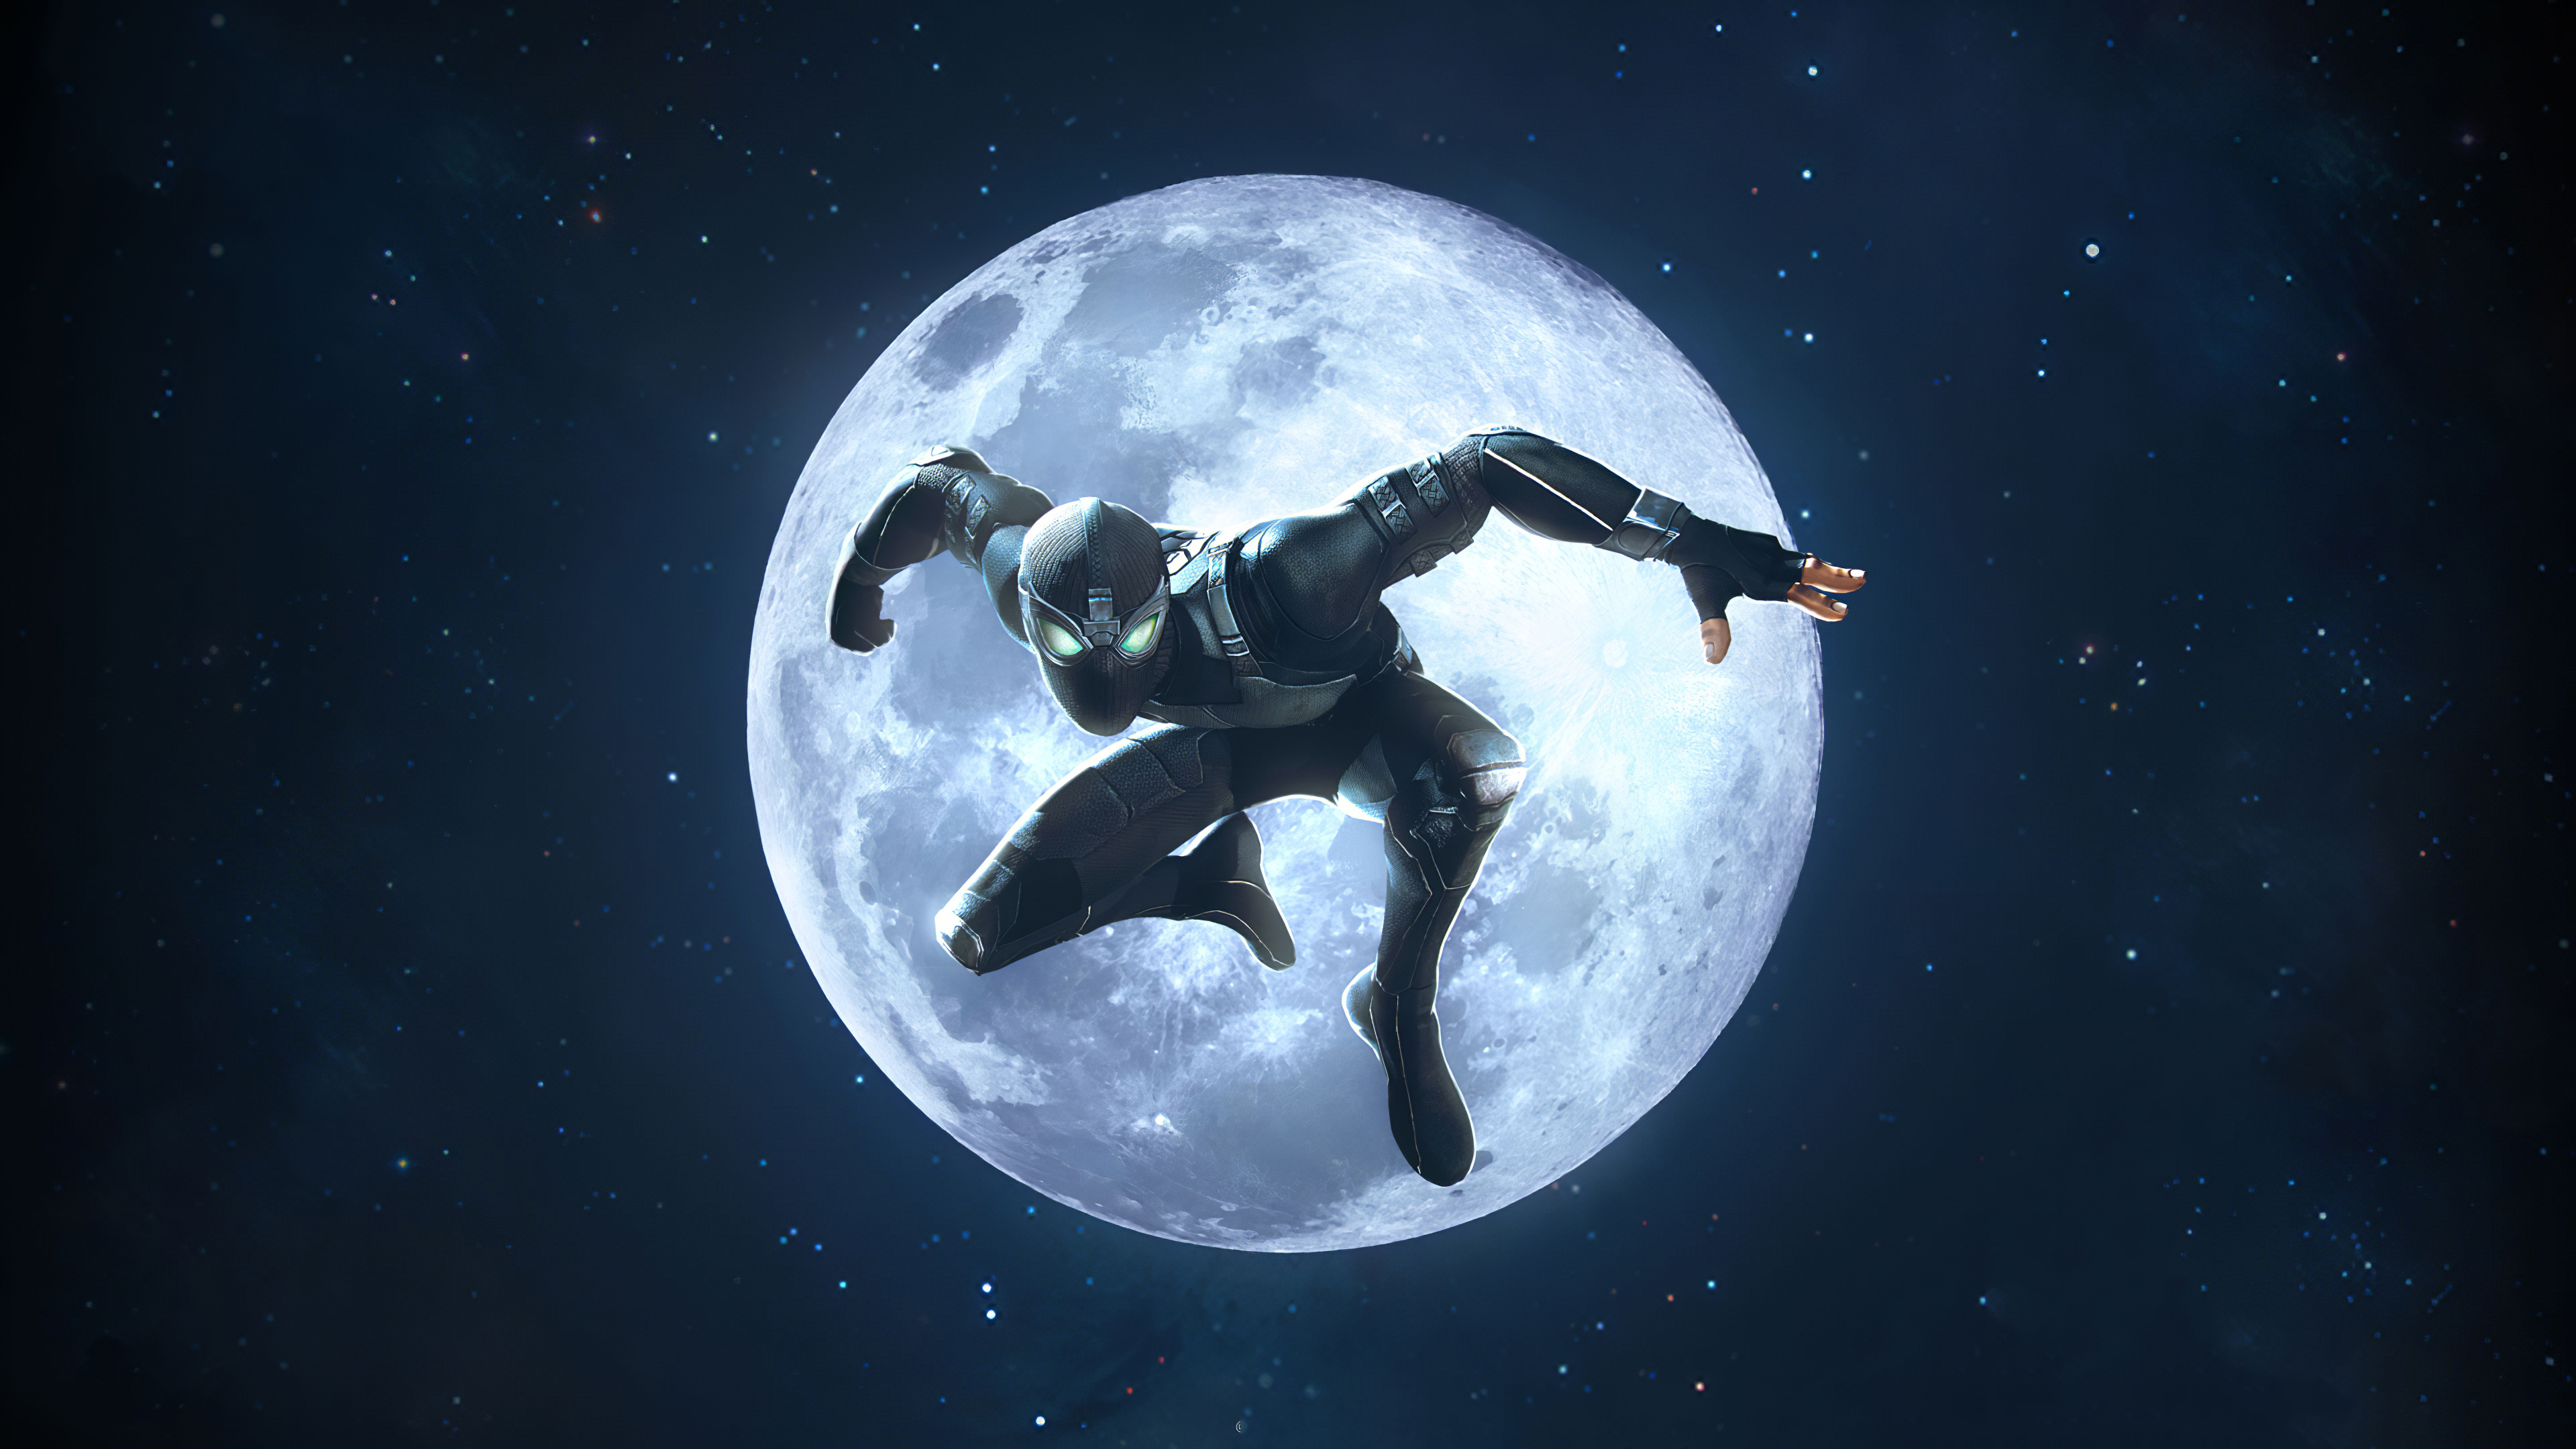 Spider-Man, Night Monkey, Marvel Contest of Champions, Moon in the background, 3840x2160 4K Desktop